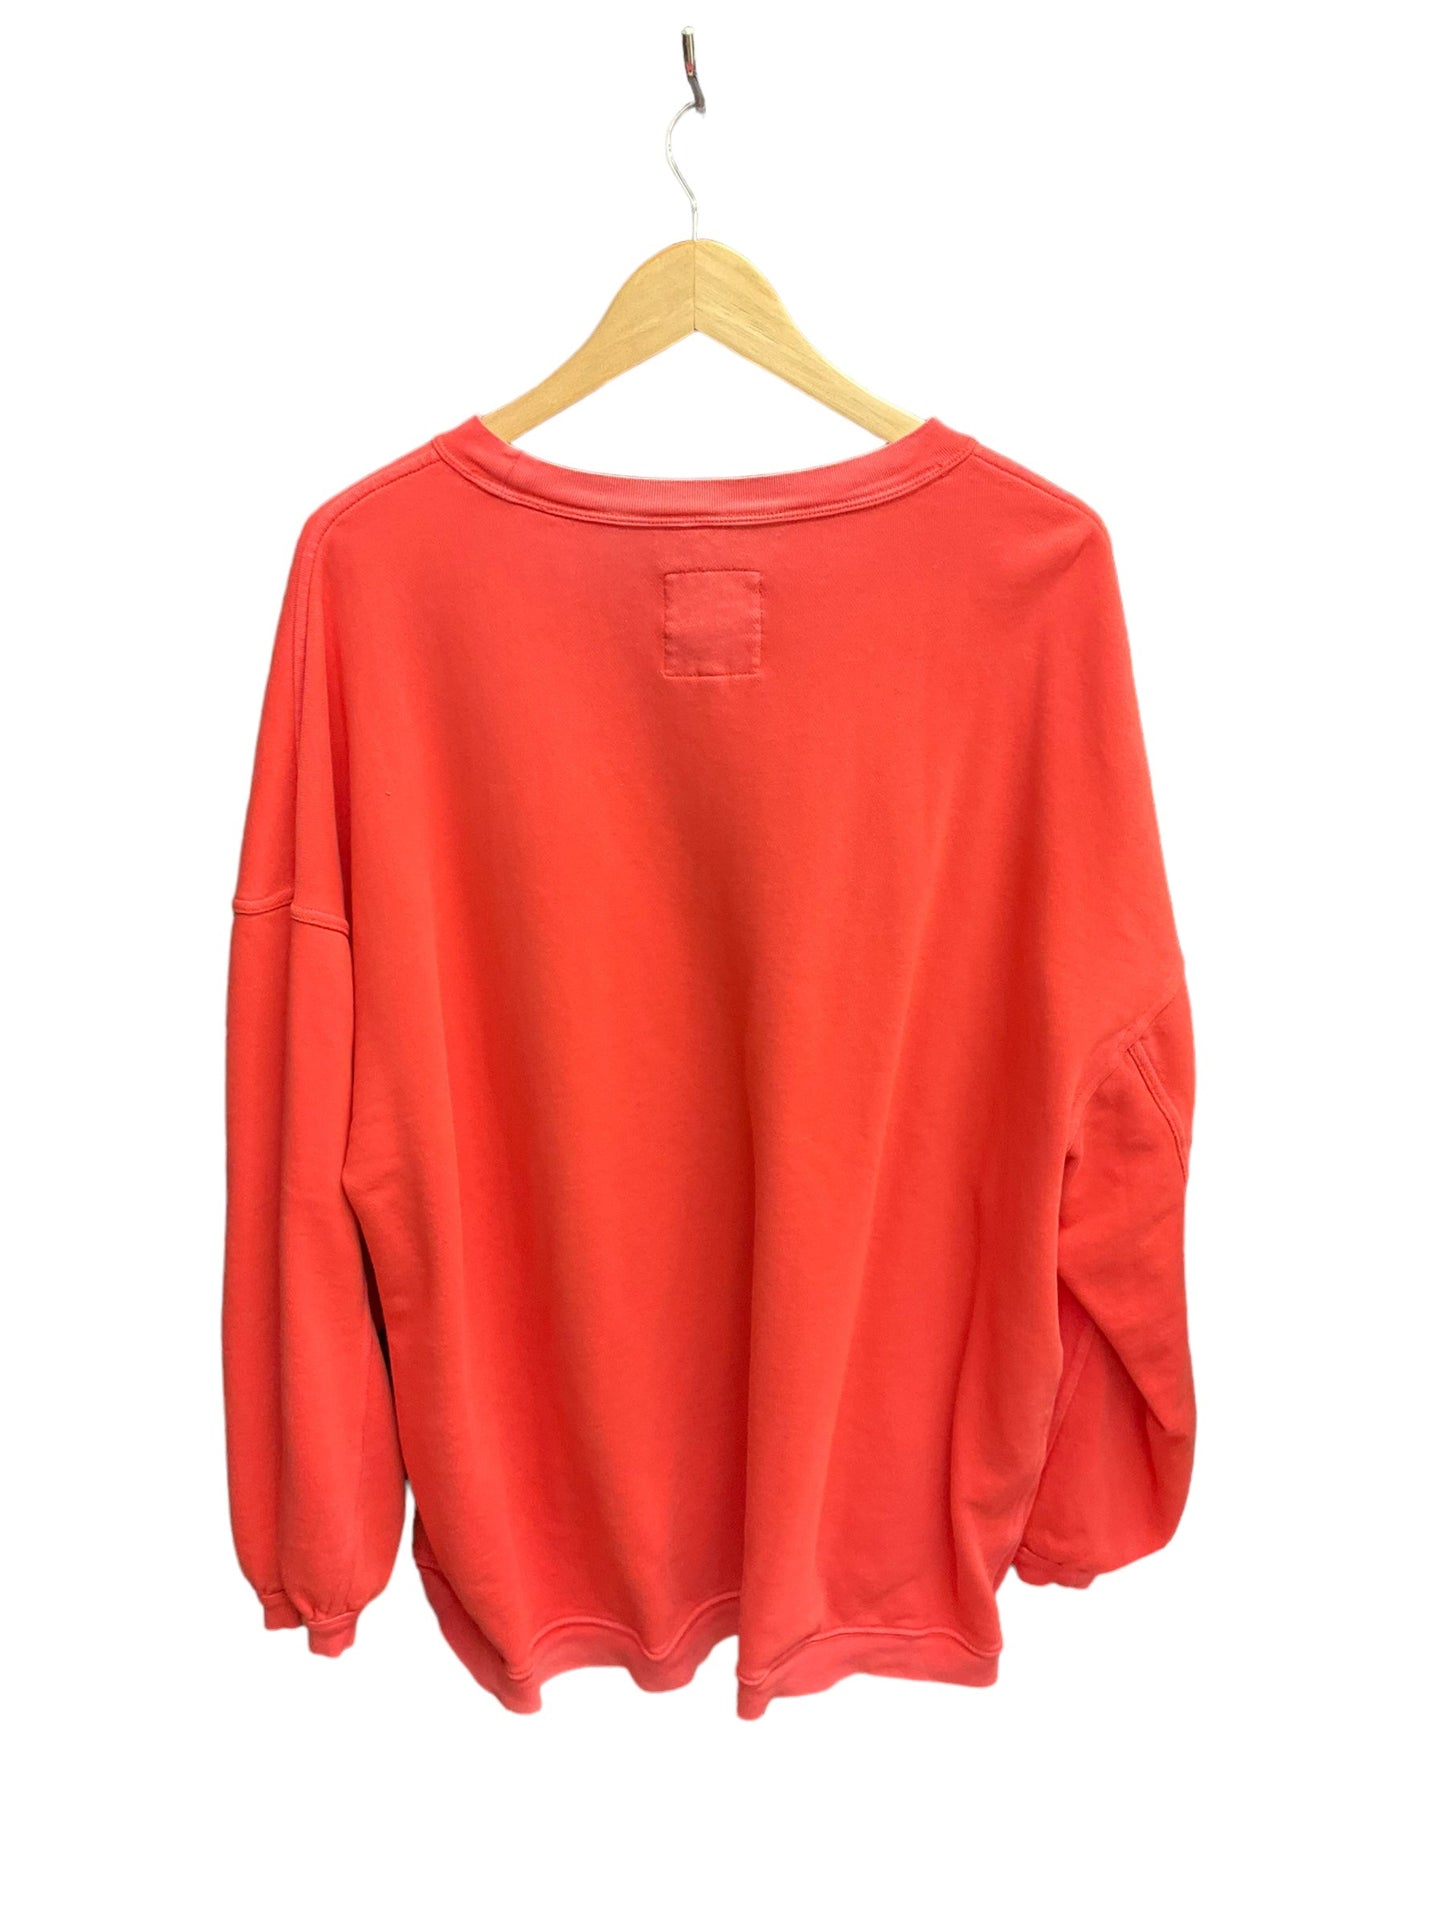 Coral Top Long Sleeve Aerie, Size Xl